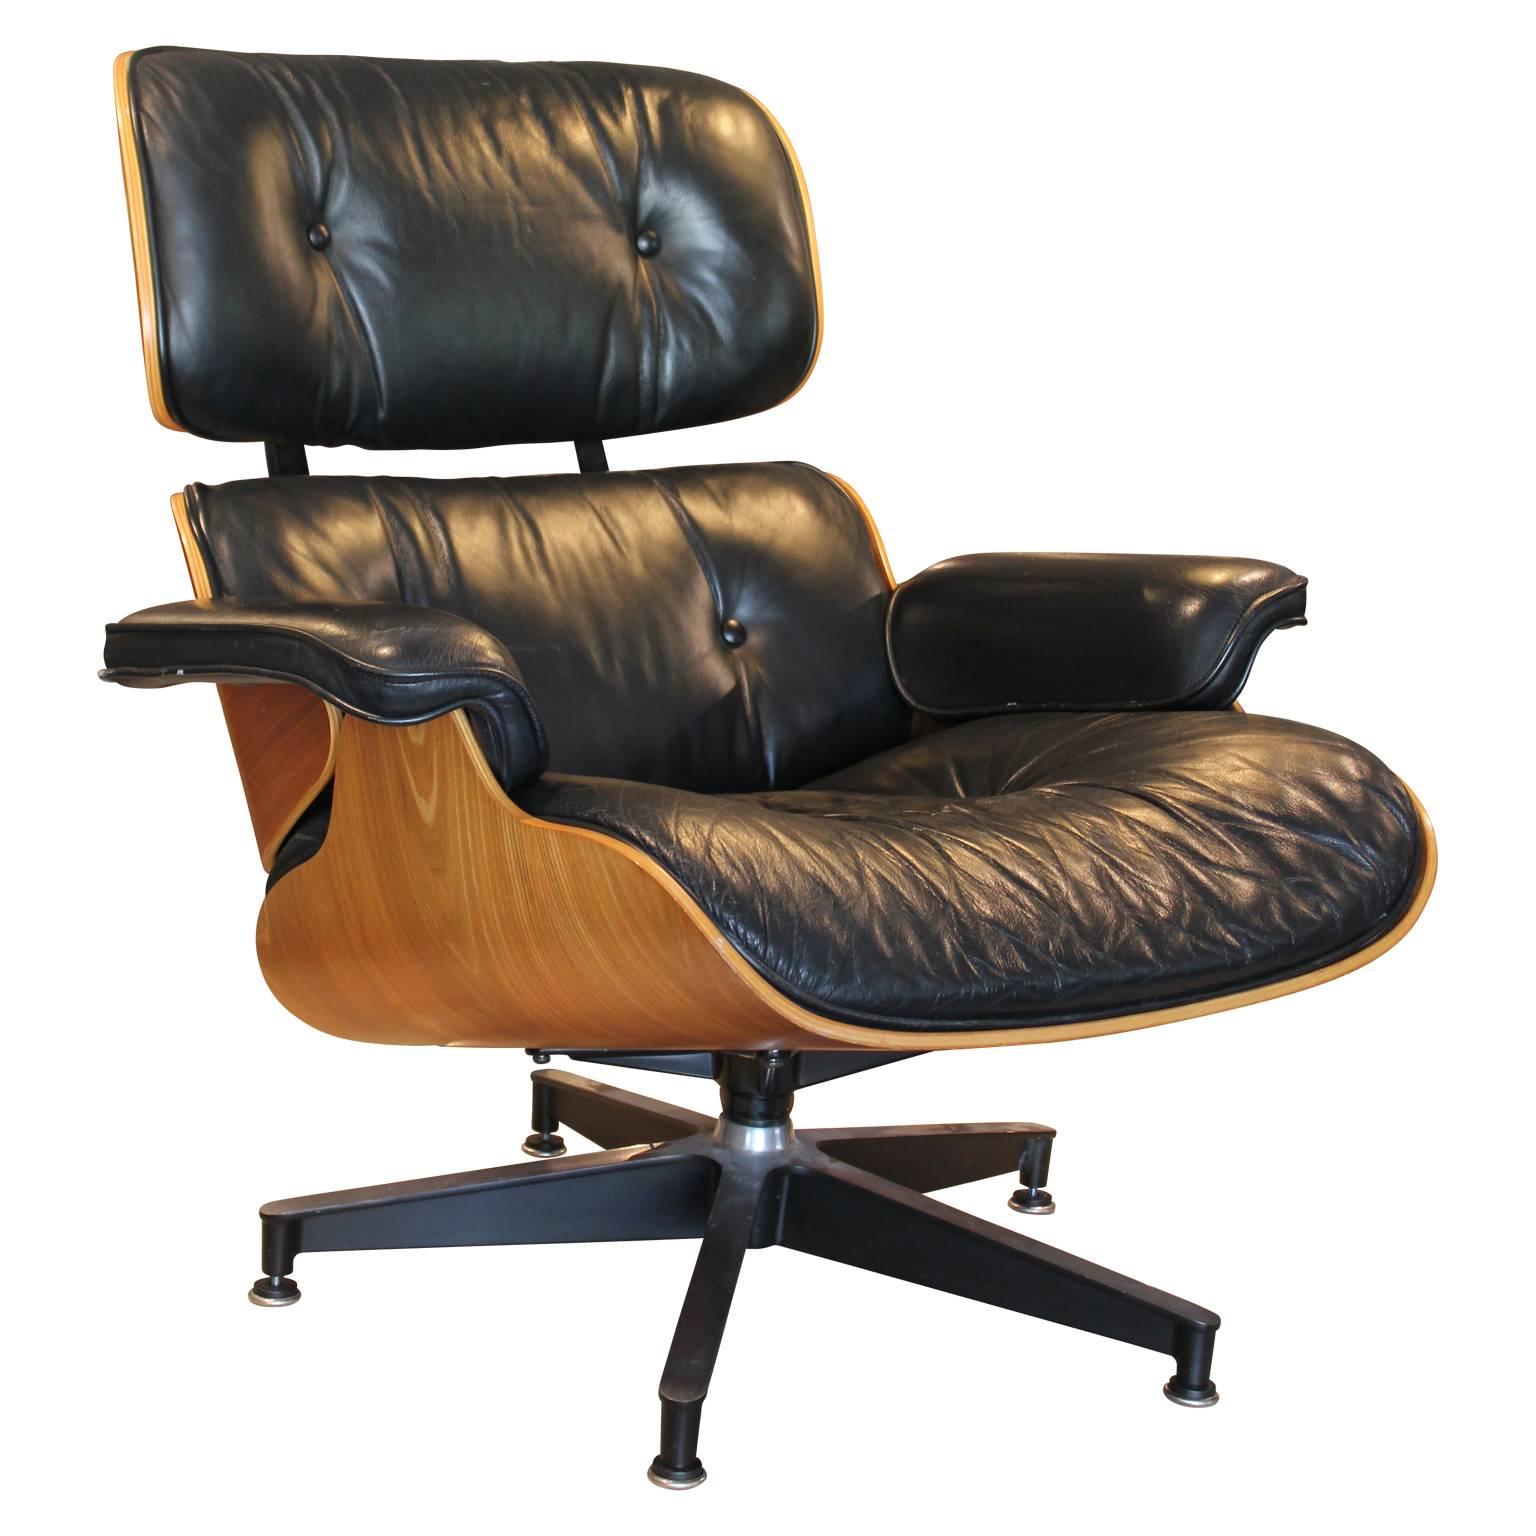 Wonderful Eames lounge chair and ottoman in a lovely black leather with a walnut frame. In good condition. 

Ottoman size: 25.5 inches wide x 22.5 inches deep and 16.5 inches high.